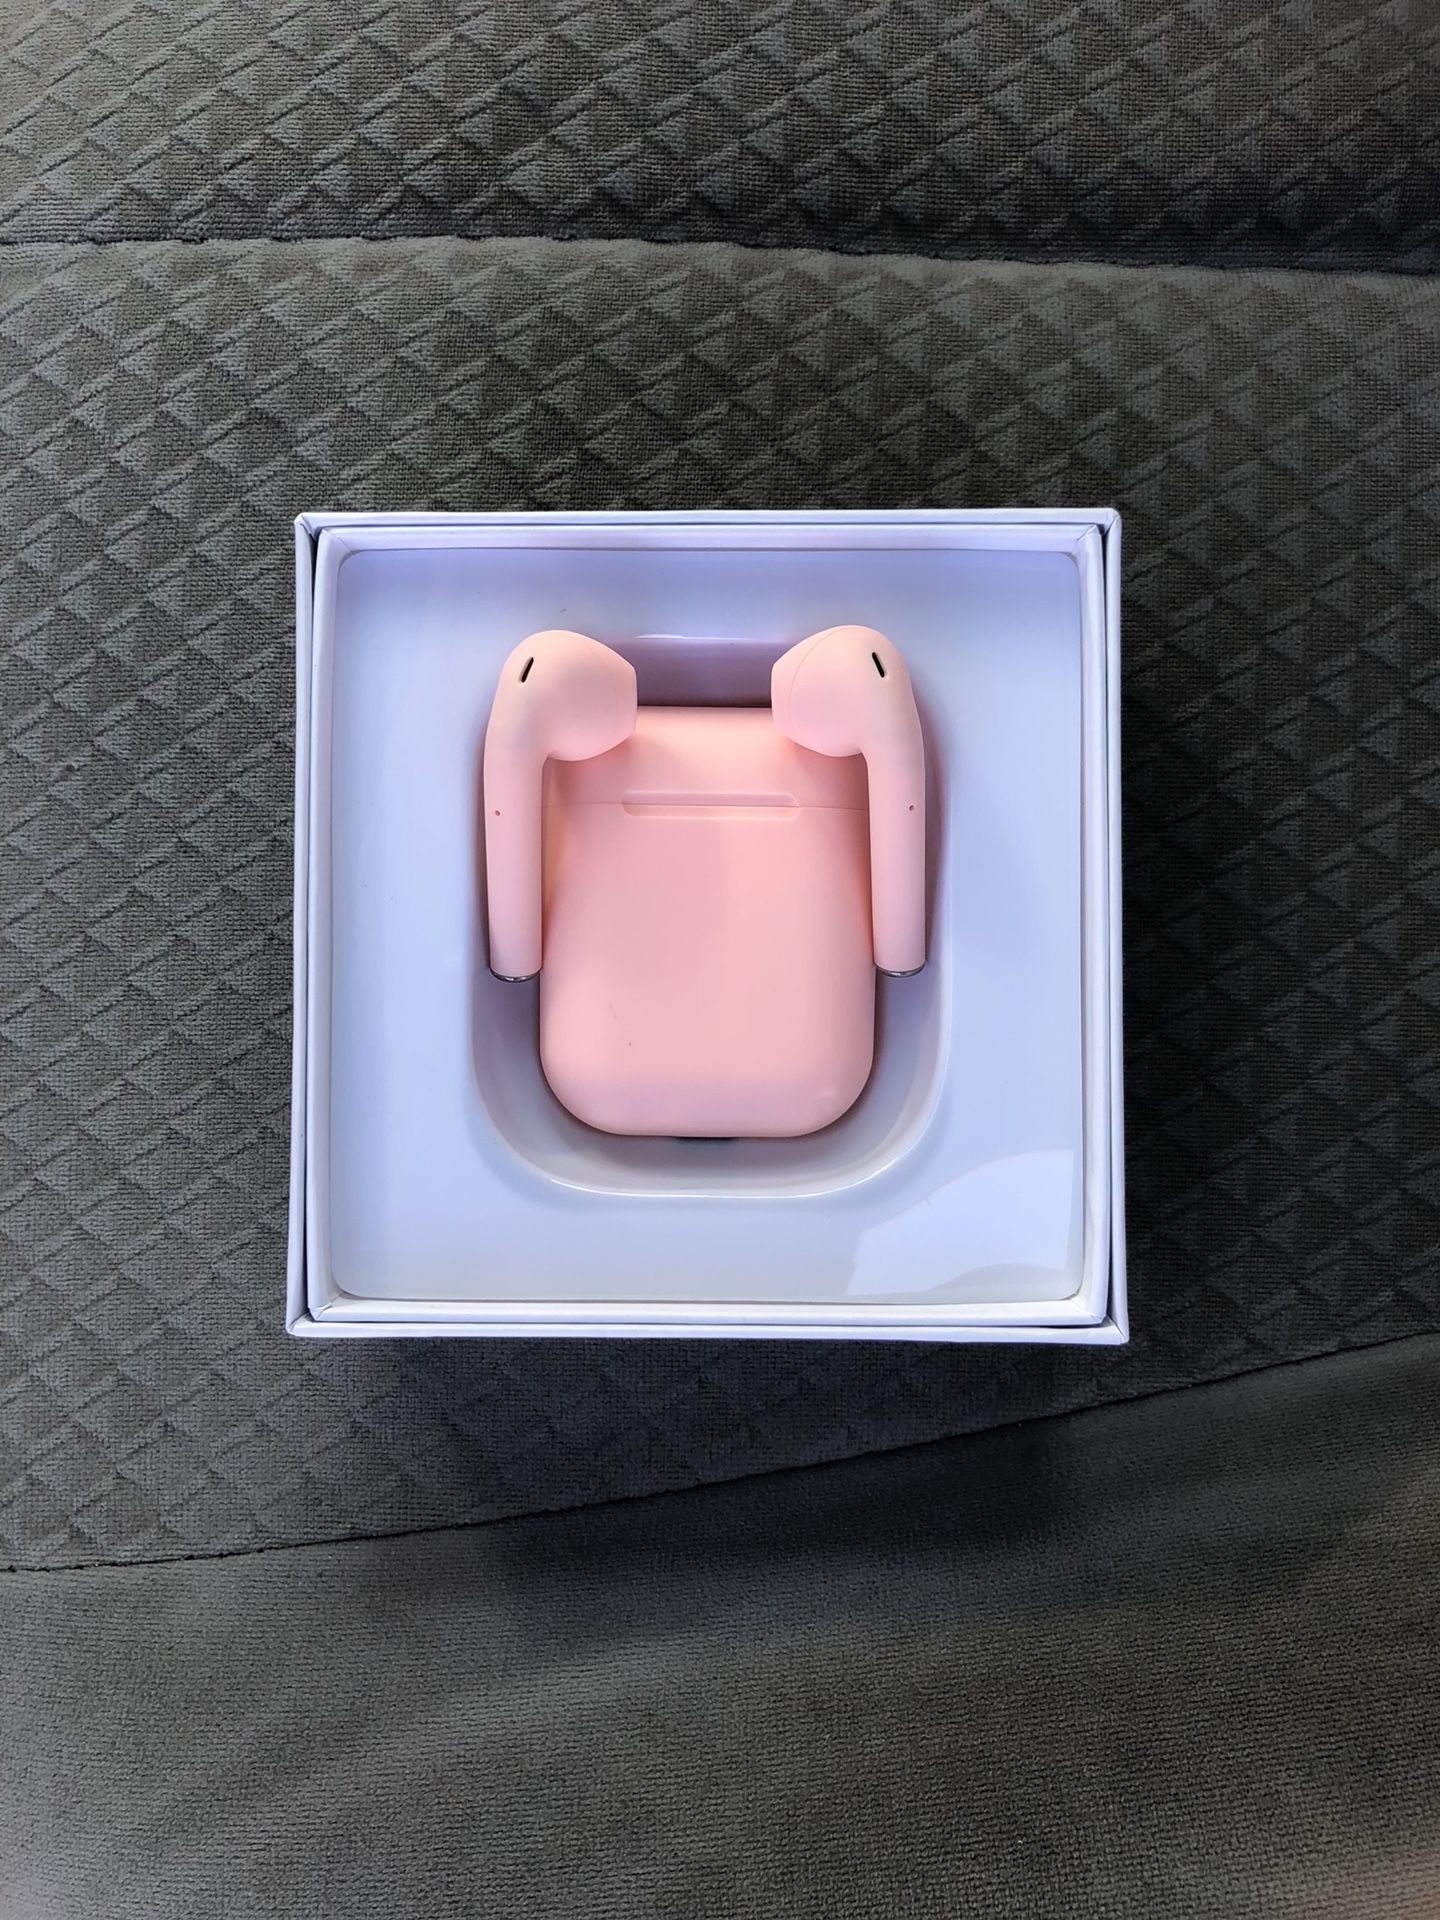 Bluetooth Wireless Earpods Earbuds Earphone APPLE AirPods IPHONE 6 7 8 X XR XS 11 MAX PRO Plus Android Pink